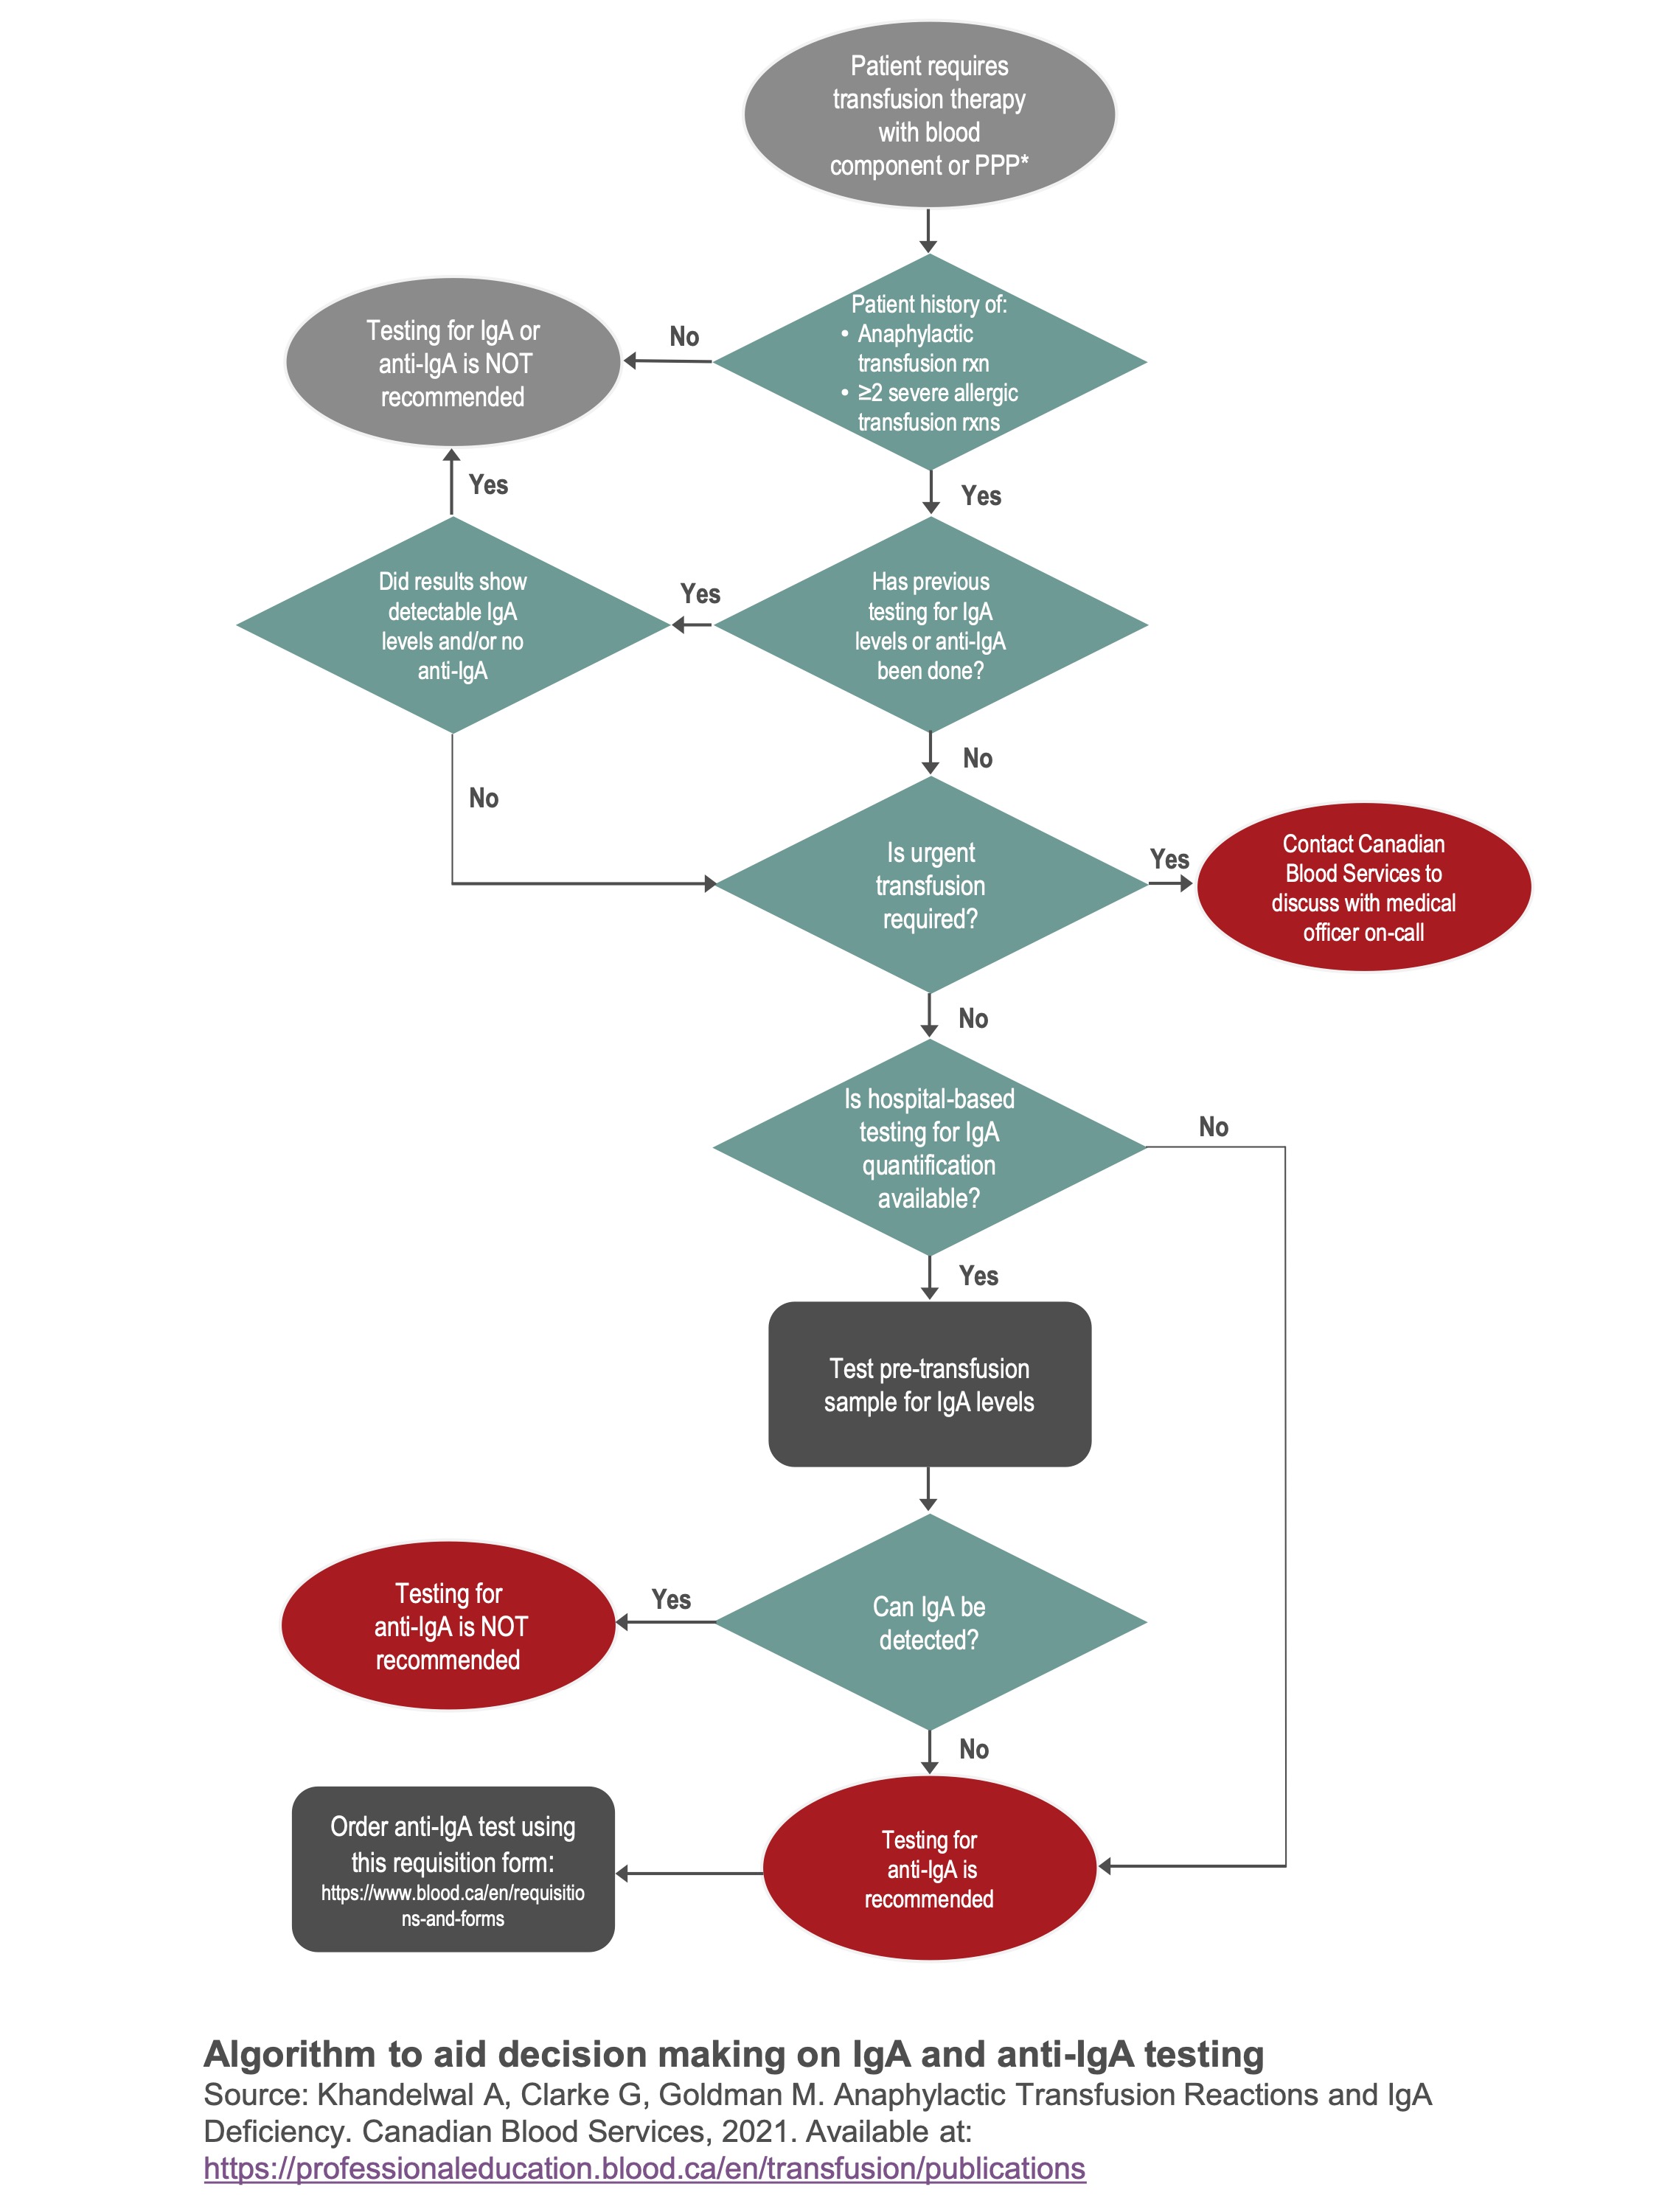 Clinical algorithm to aid decision making on IgA and anti-IgA testing for patients requiring transfusion therapy for customers of Canadian Blood Services.